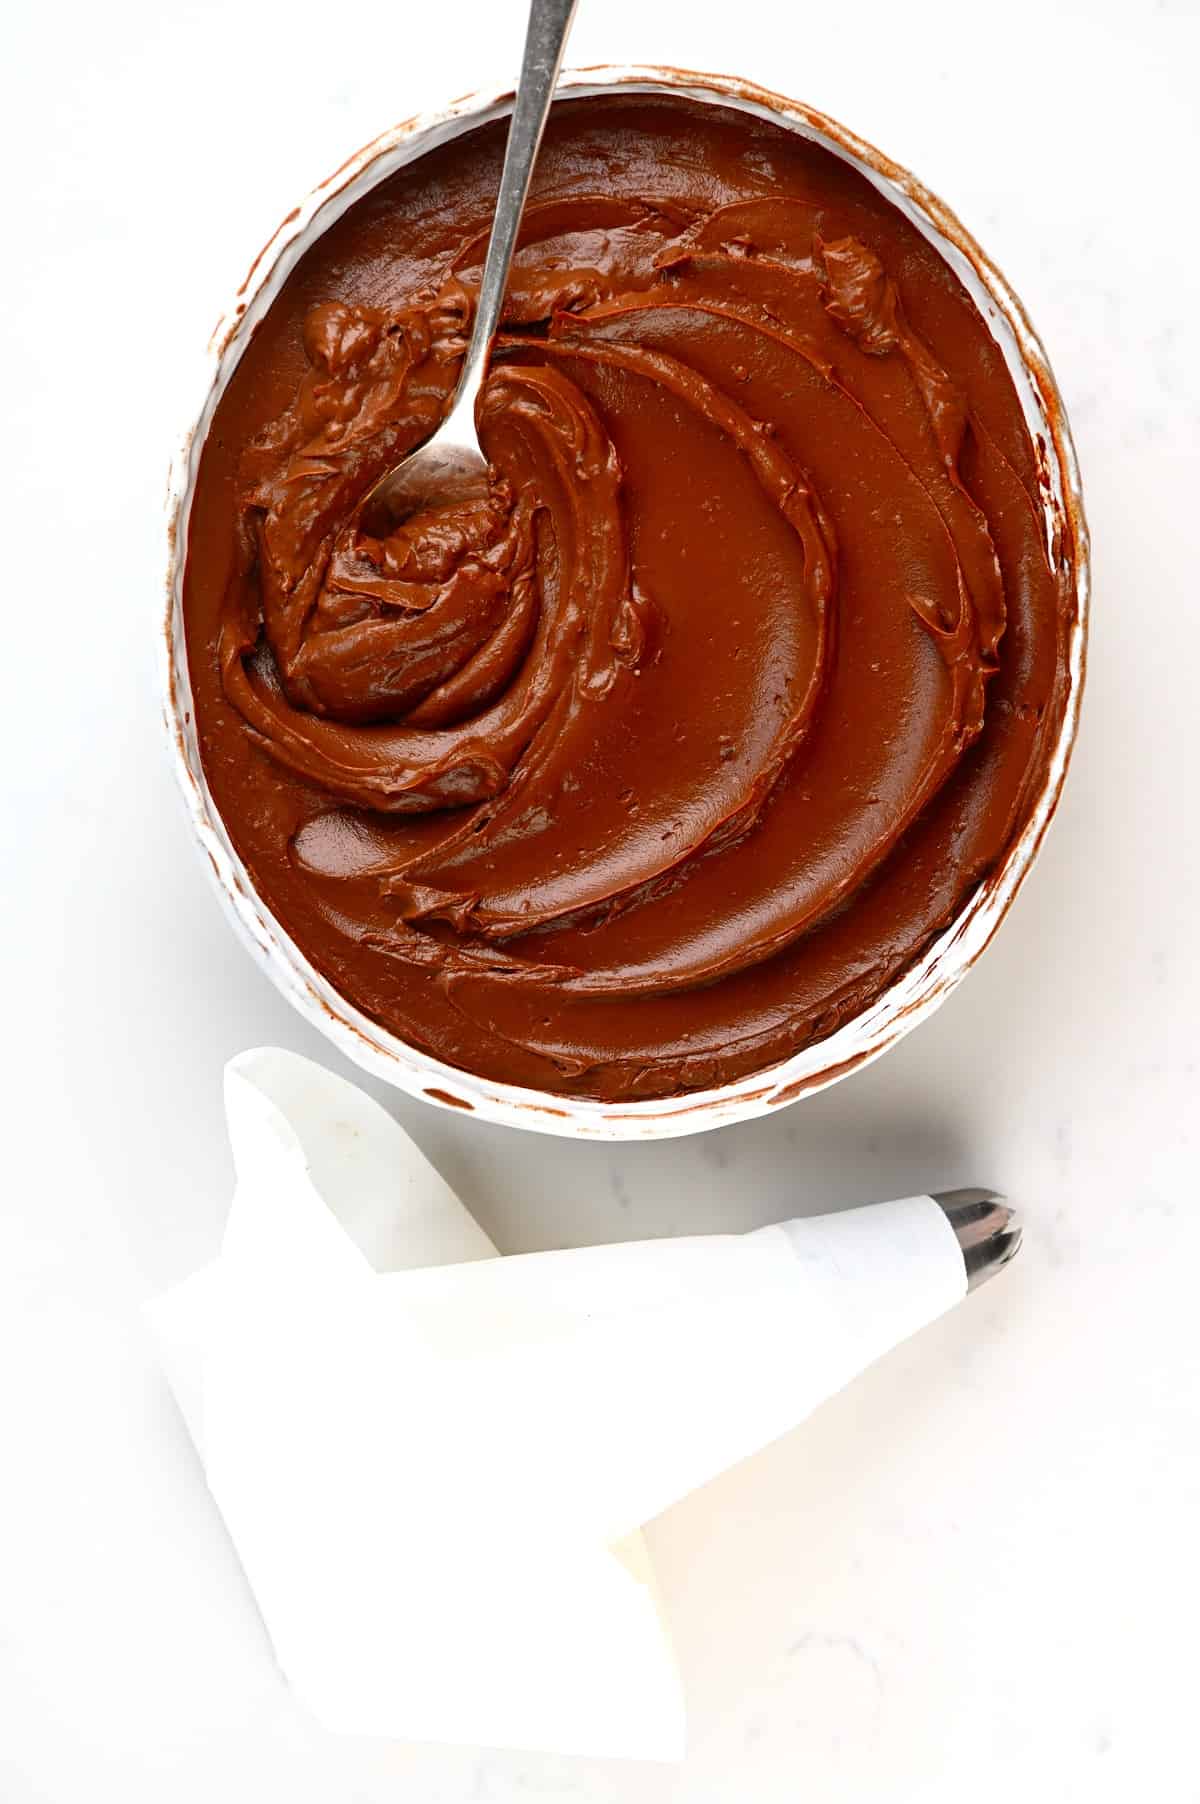 A bowl with Chocolate Pastry Cream and a piping bag